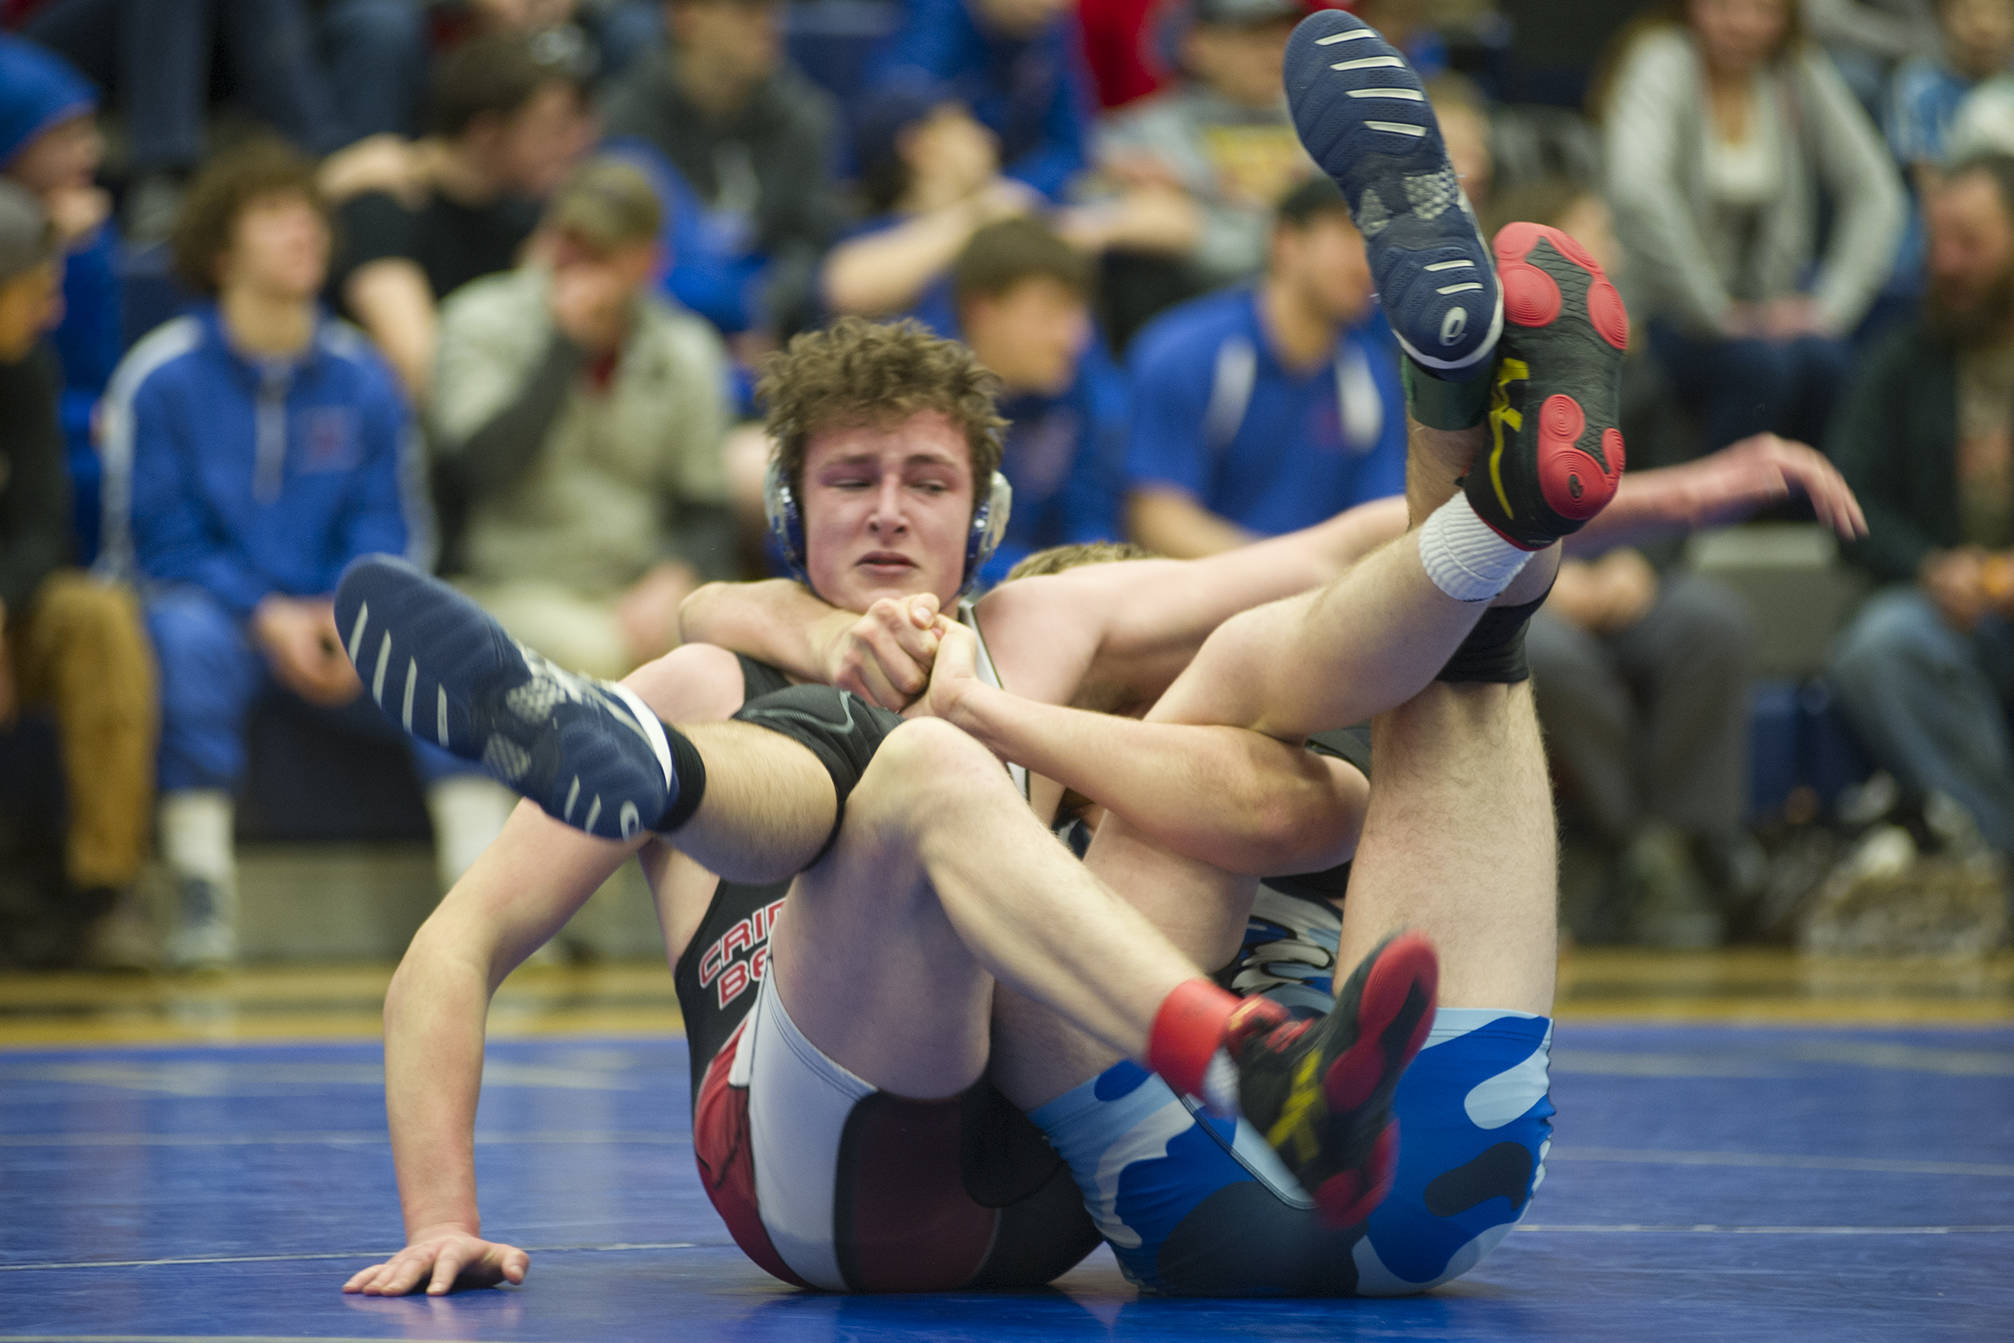 Juneau-Douglas’ Steven Ireland-Haight tries to free himself from Thunder Mountain’s Nick Nick Tipton’s hold during their 171-pound finals match in the Region V Division I Wrestling Championships at TMHS on Saturday, Dec. 8, 2018. Tipton earned a 4-2 decision to win the region title. (Nolin Ainsworth | Juneau Empire)